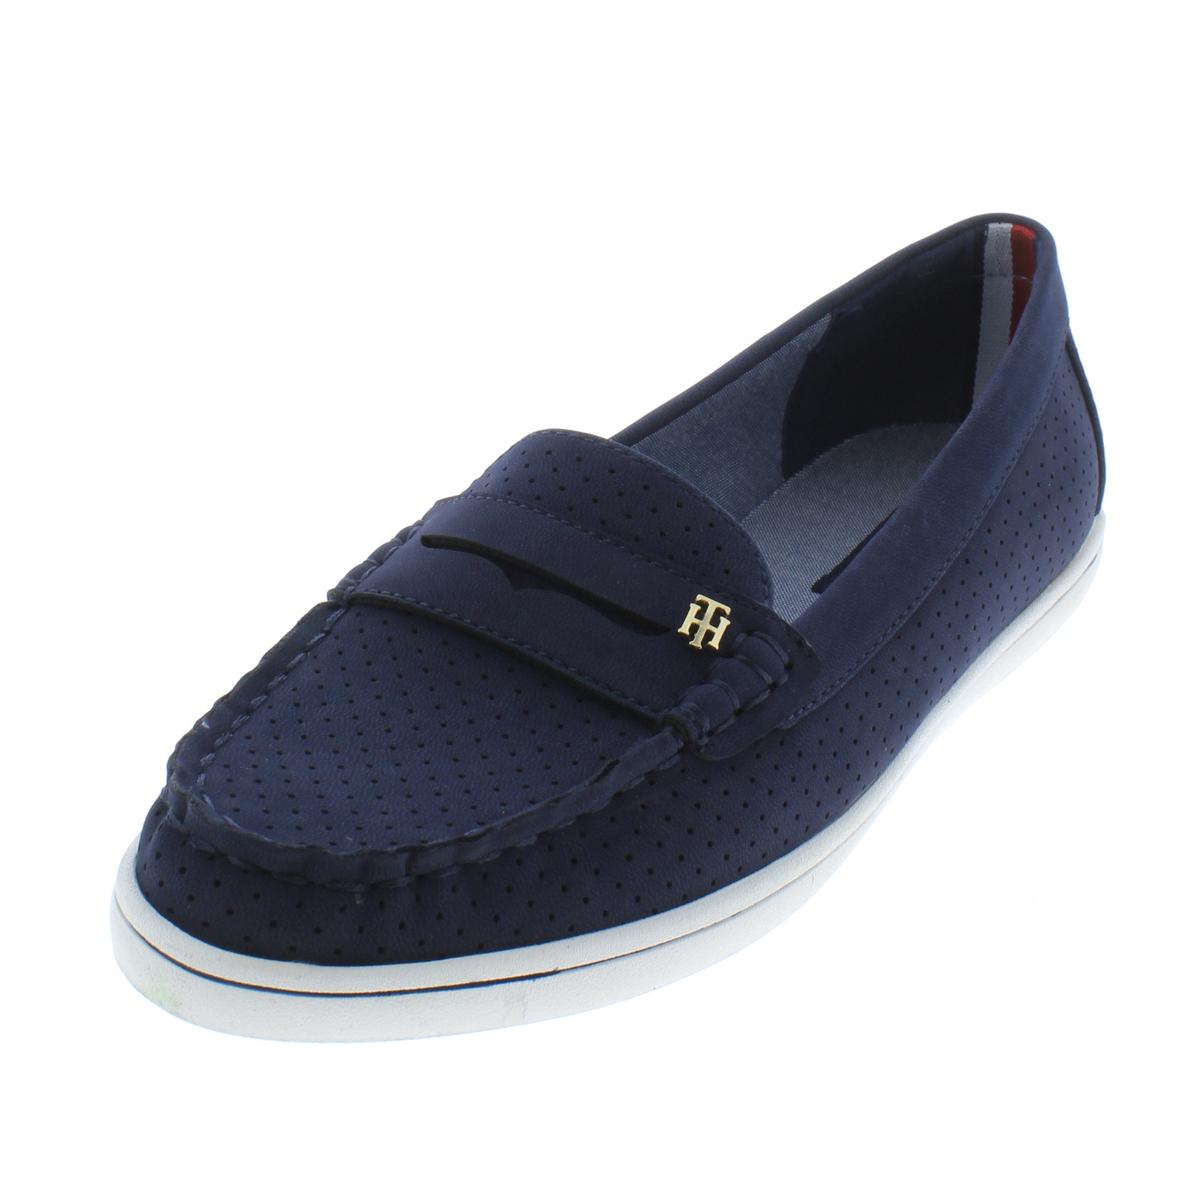 Tommy Hilfiger Womens Butter5 Navy Boat Shoes Shoes 7 Medium (B,M) BHFO ...